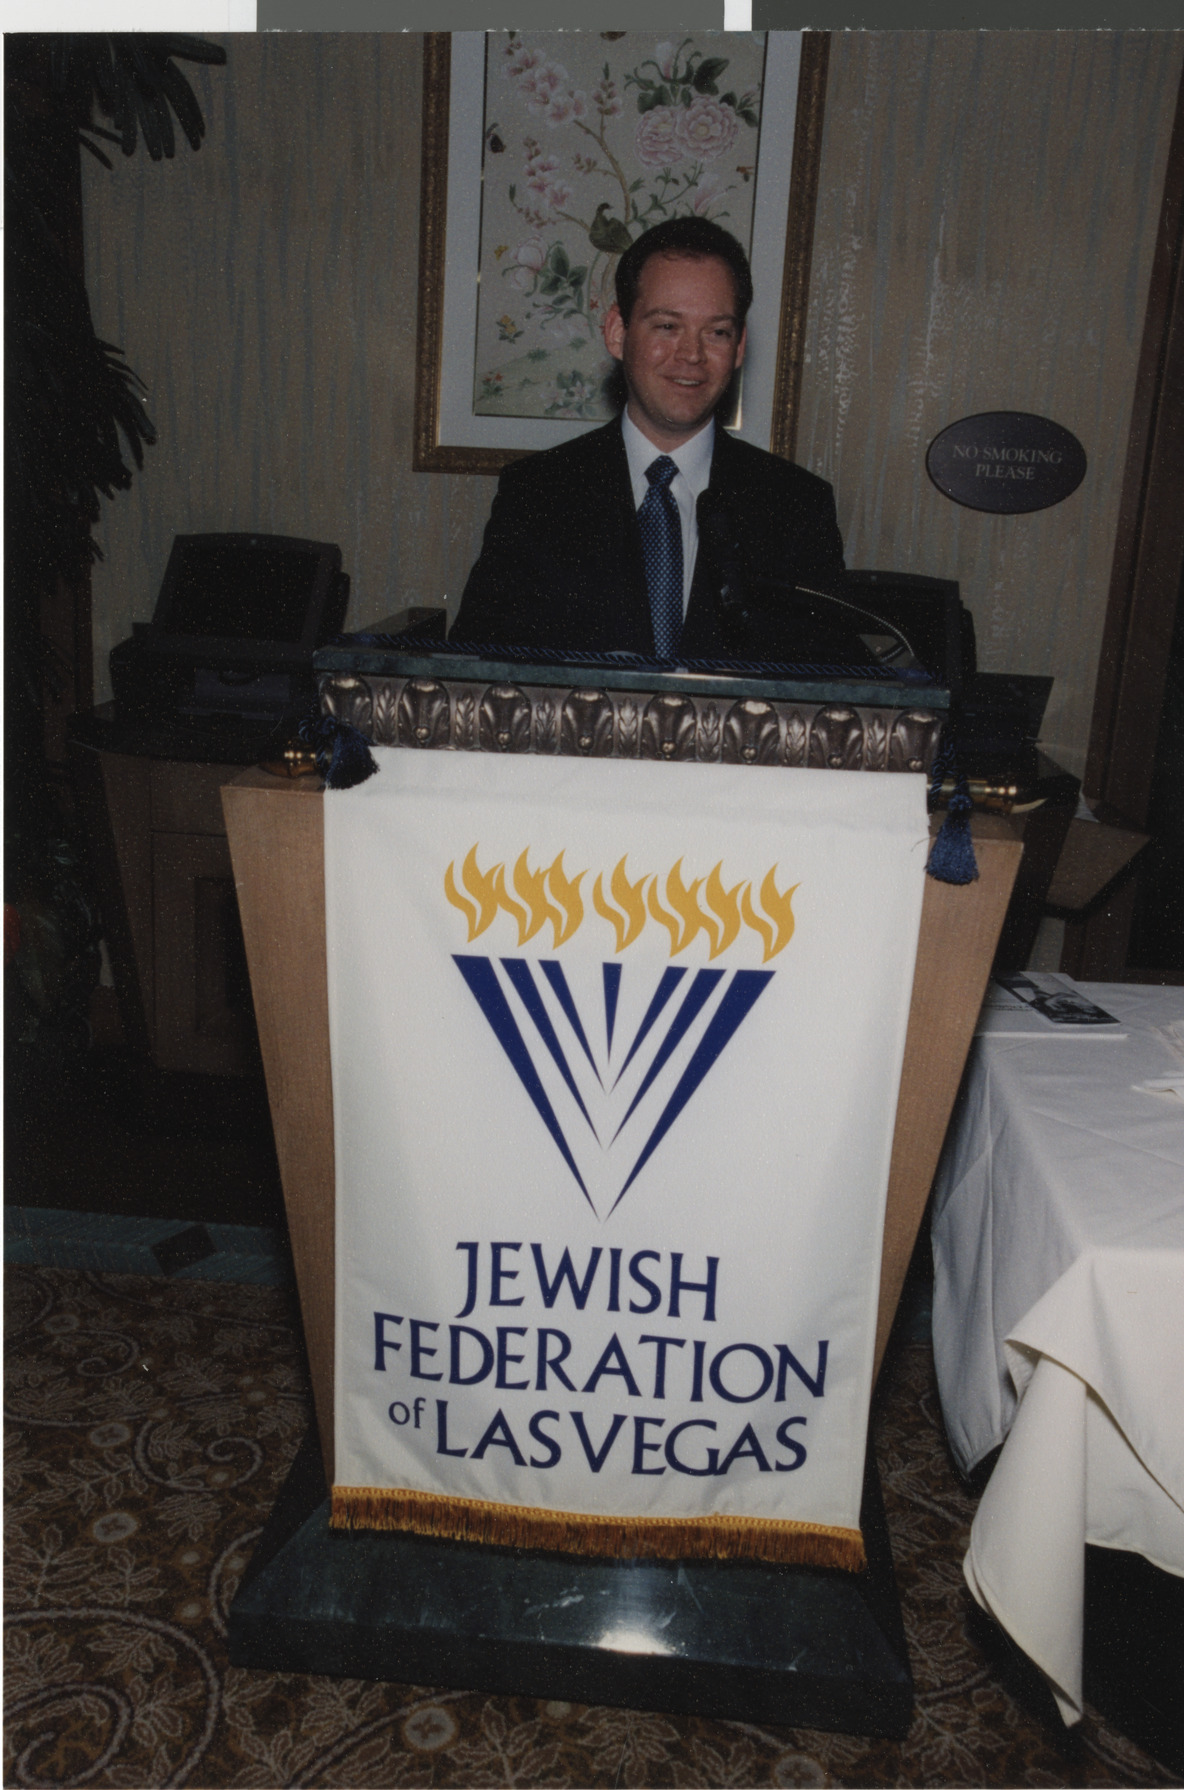 Photograph of Michael Novick at Major Gifts Dinner, 2001